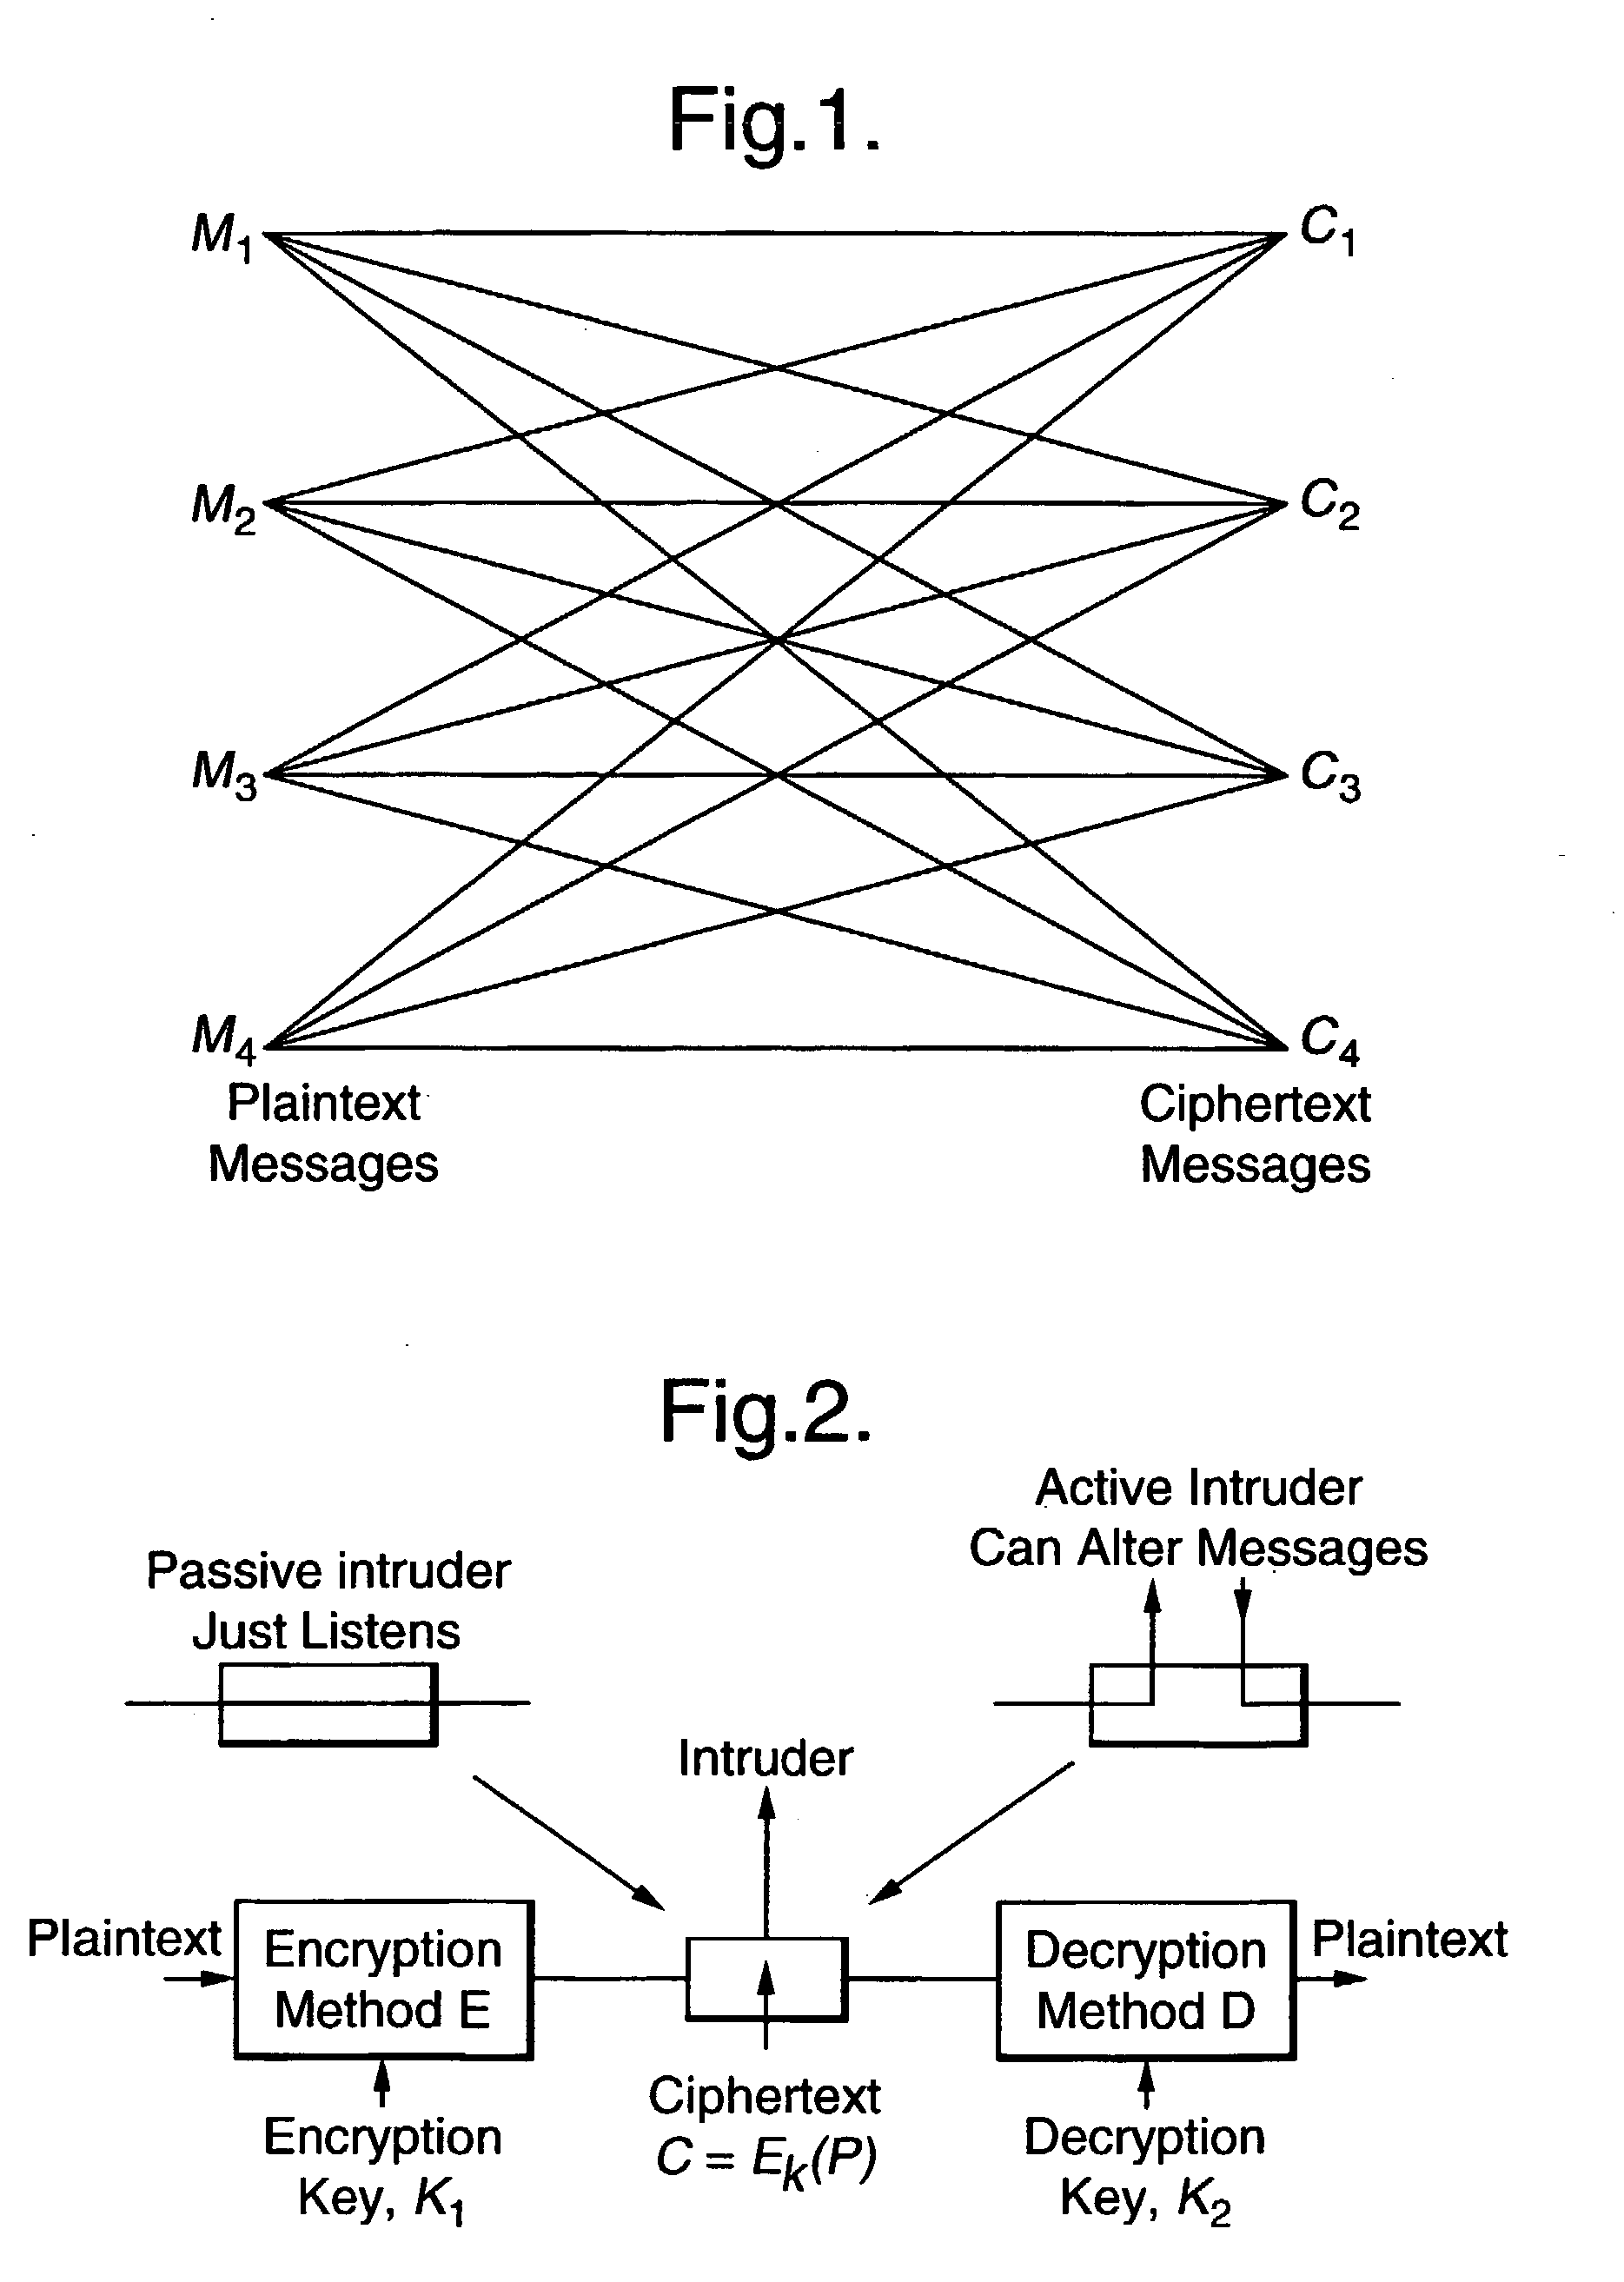 Applications of fractal and/or chaotic techniques